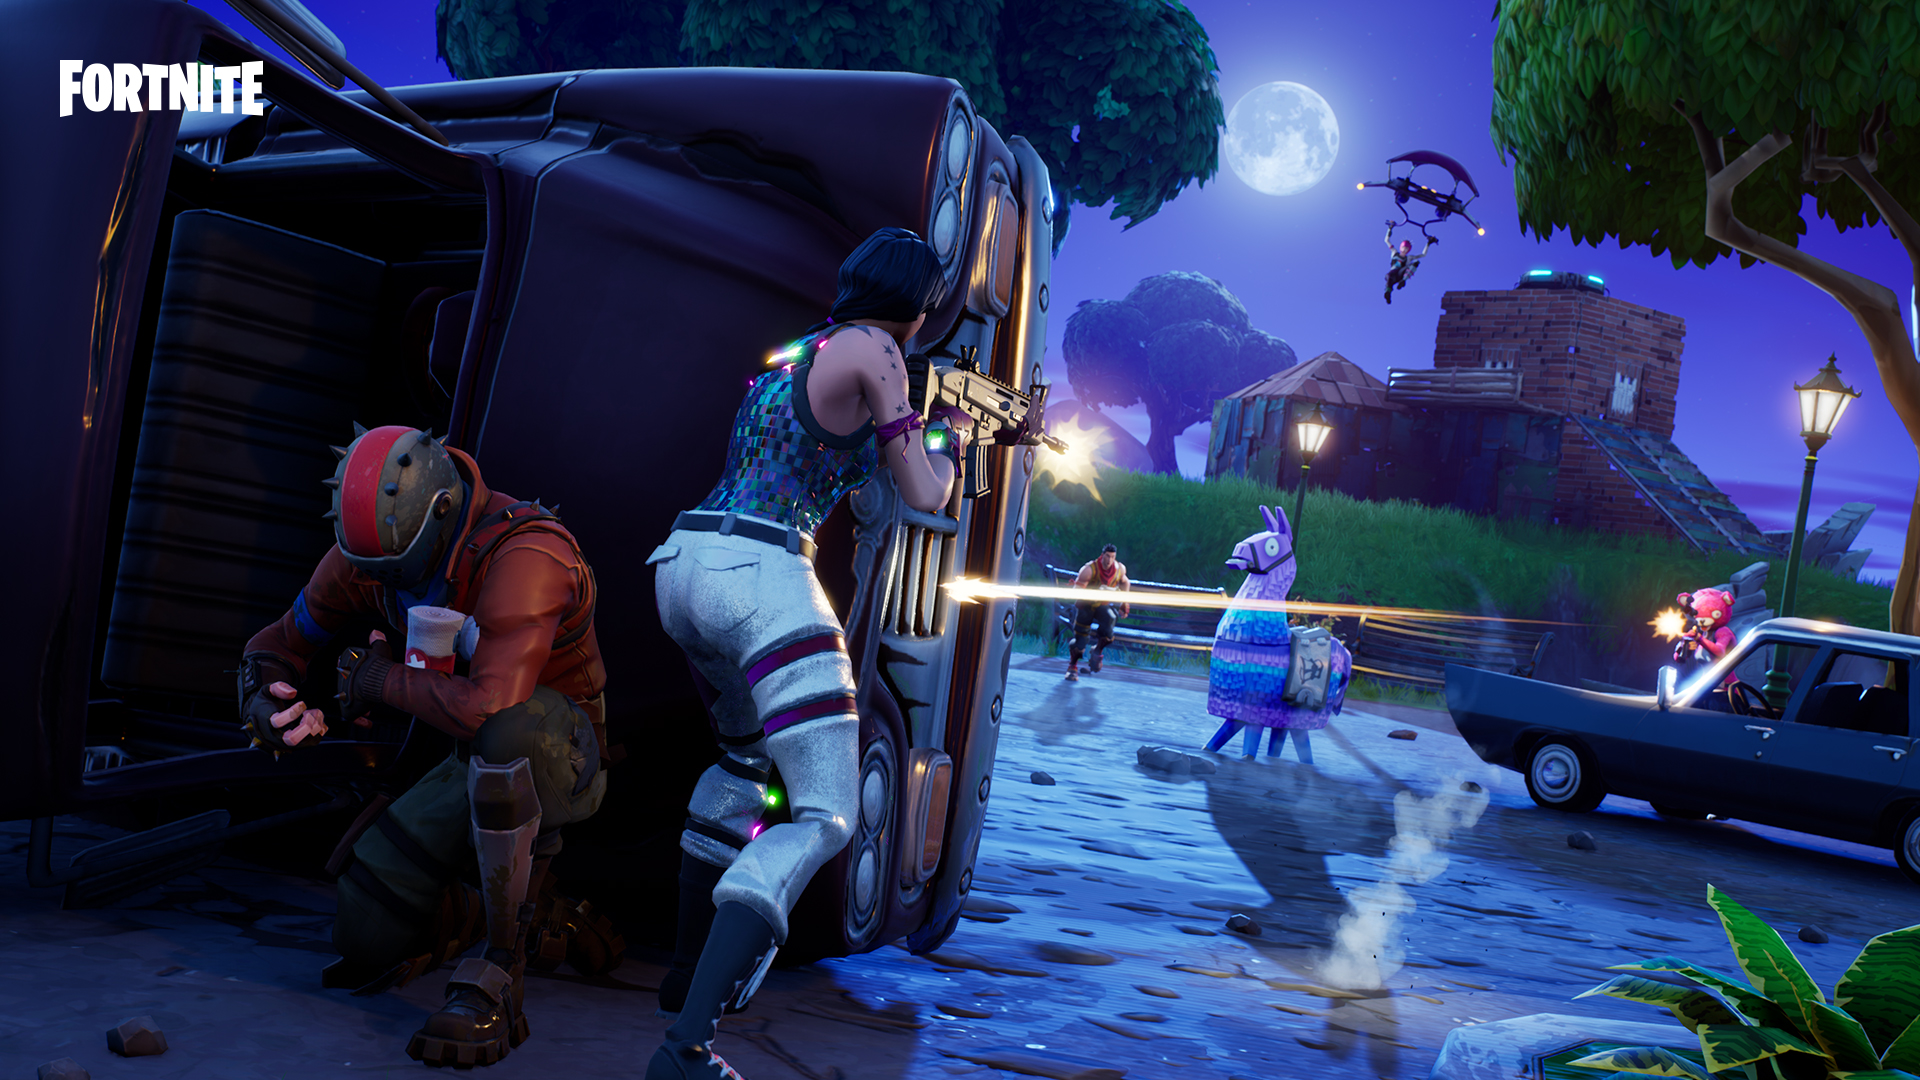 epic games fortnite has a new update out today and it brings a new epic and legendary pump shotgun along with a new limited time mode called team rumble - free vending machine fortnite team rumble